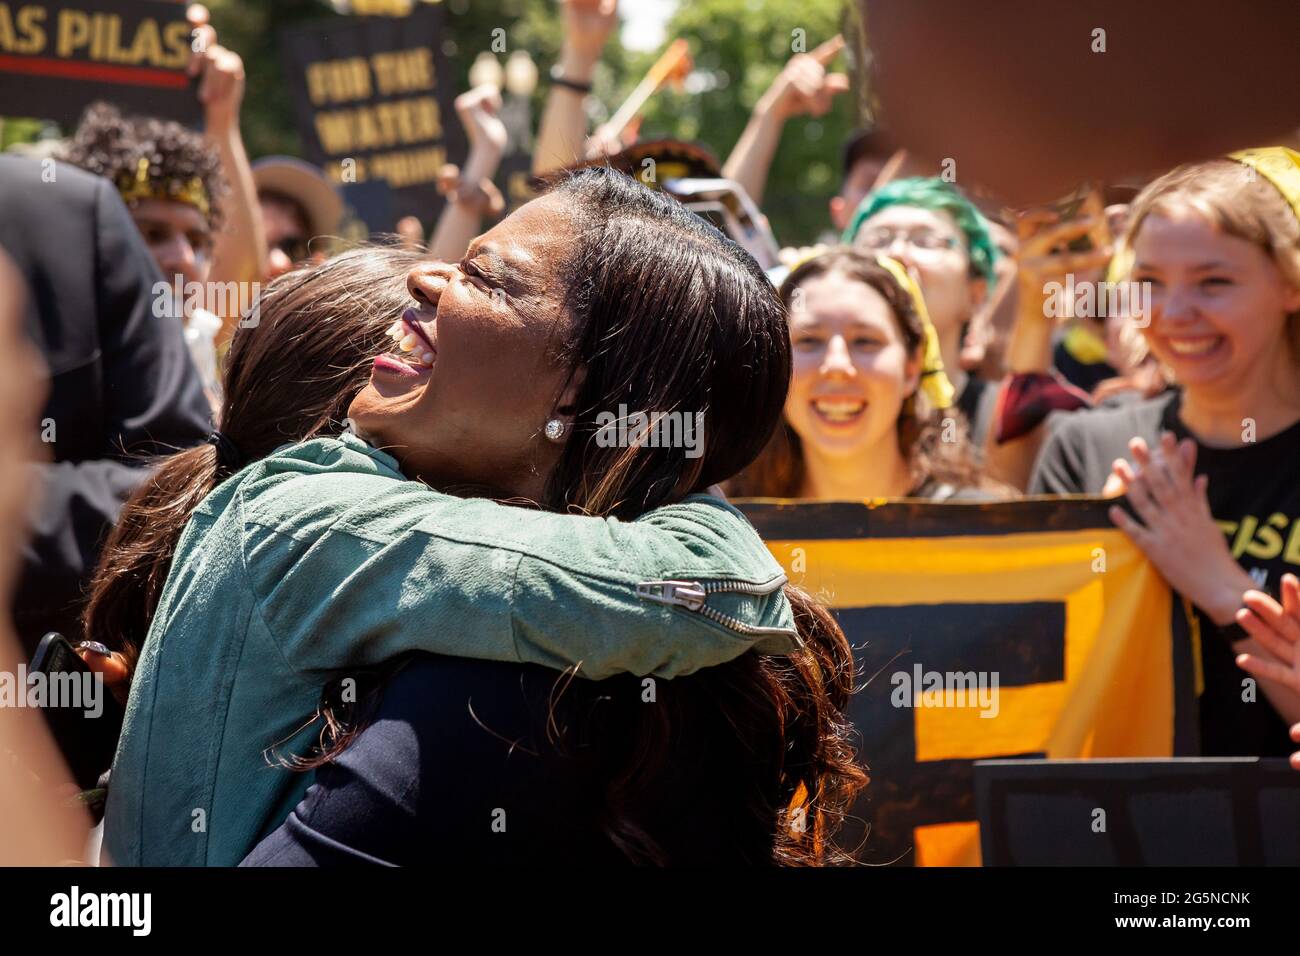 Washington, DC, USA, 28 June, 2021.  Pictured: Congresswoman Alexandria Ocasio-Cortez (D-NY) (left) greets Congresswoman Cori Bush (D-MO) (right) after Bush speaks to hundreds of protesters in Lafayette Square in front of the White House.  Protesters are young adults who are members of the Sunrise Movement.  They have 3 demands of the Biden Administration: no compromises on climate with Congressional Republicans, meeting with Sunrise Movement, and the creation of a Civilian Conservation Corps.  Credit: Allison Bailey / Alamy Live News Stock Photo